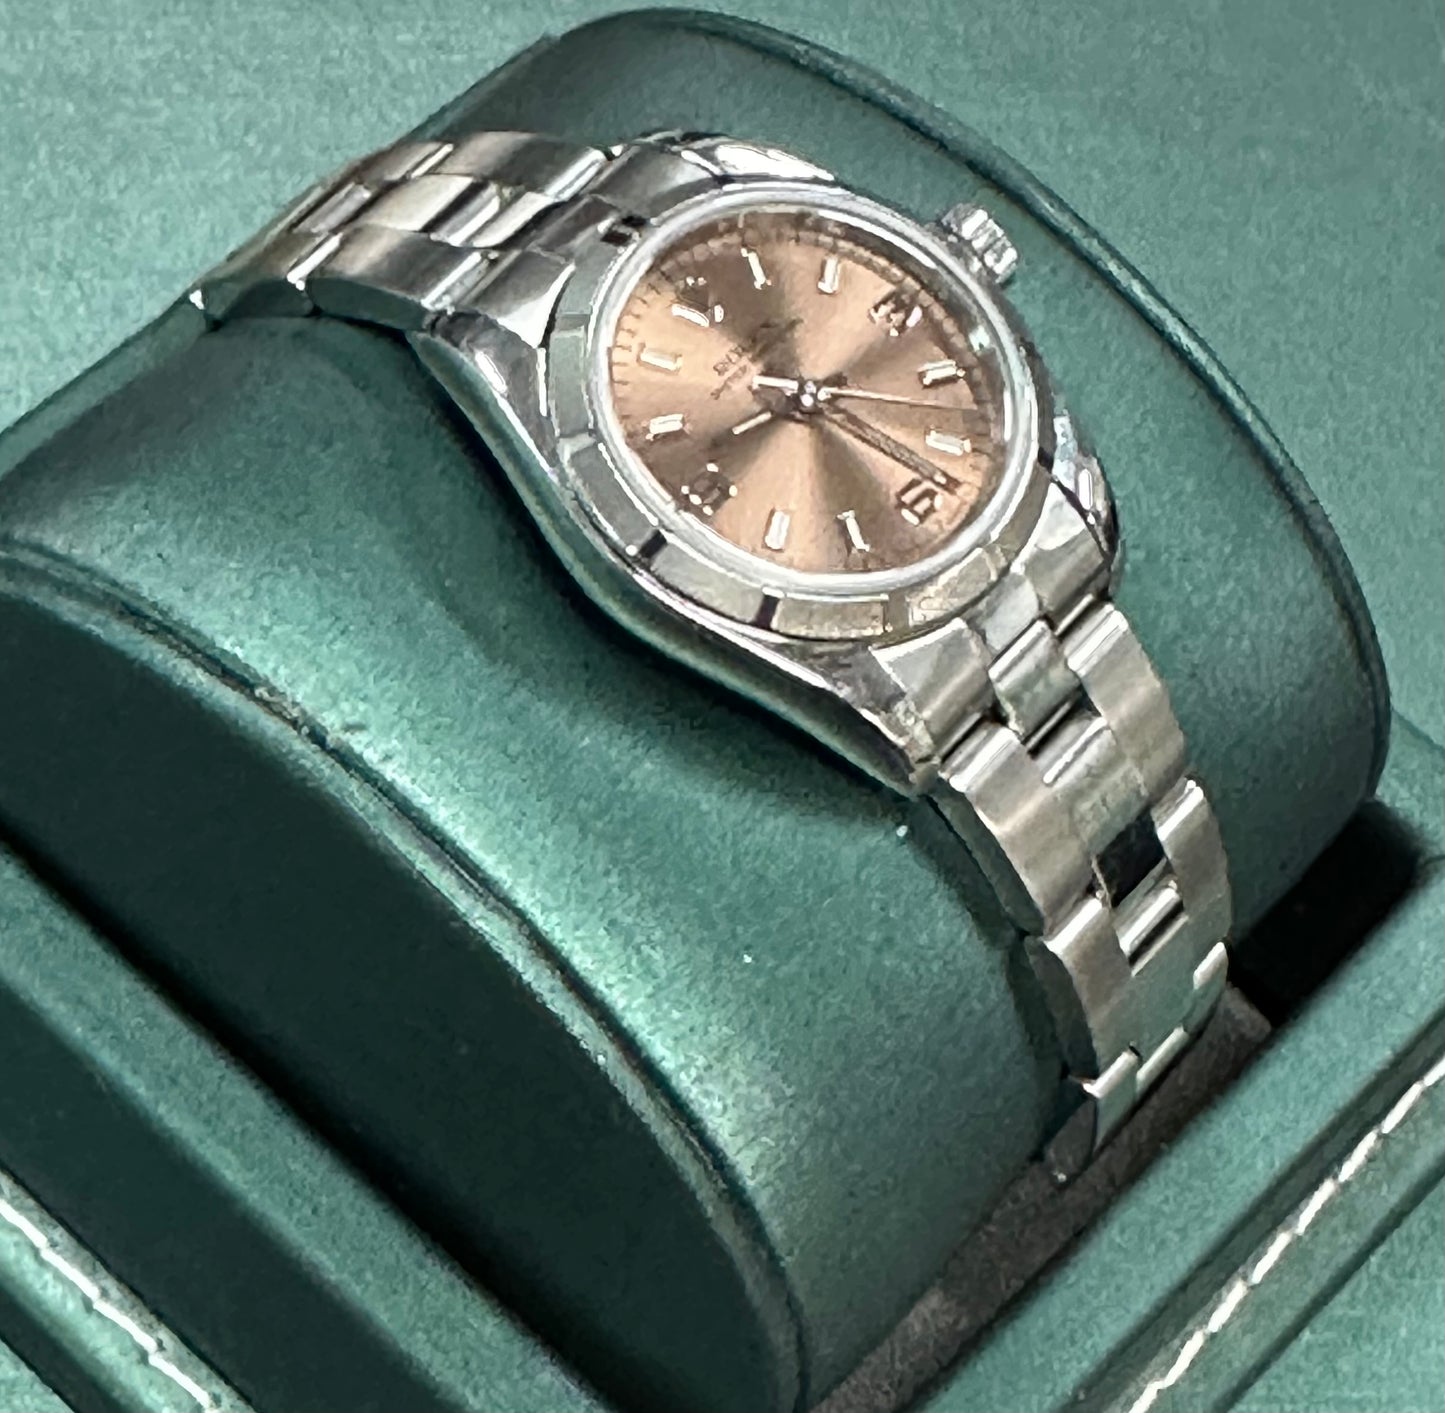 Rolex 26mm salmon face stainless steel